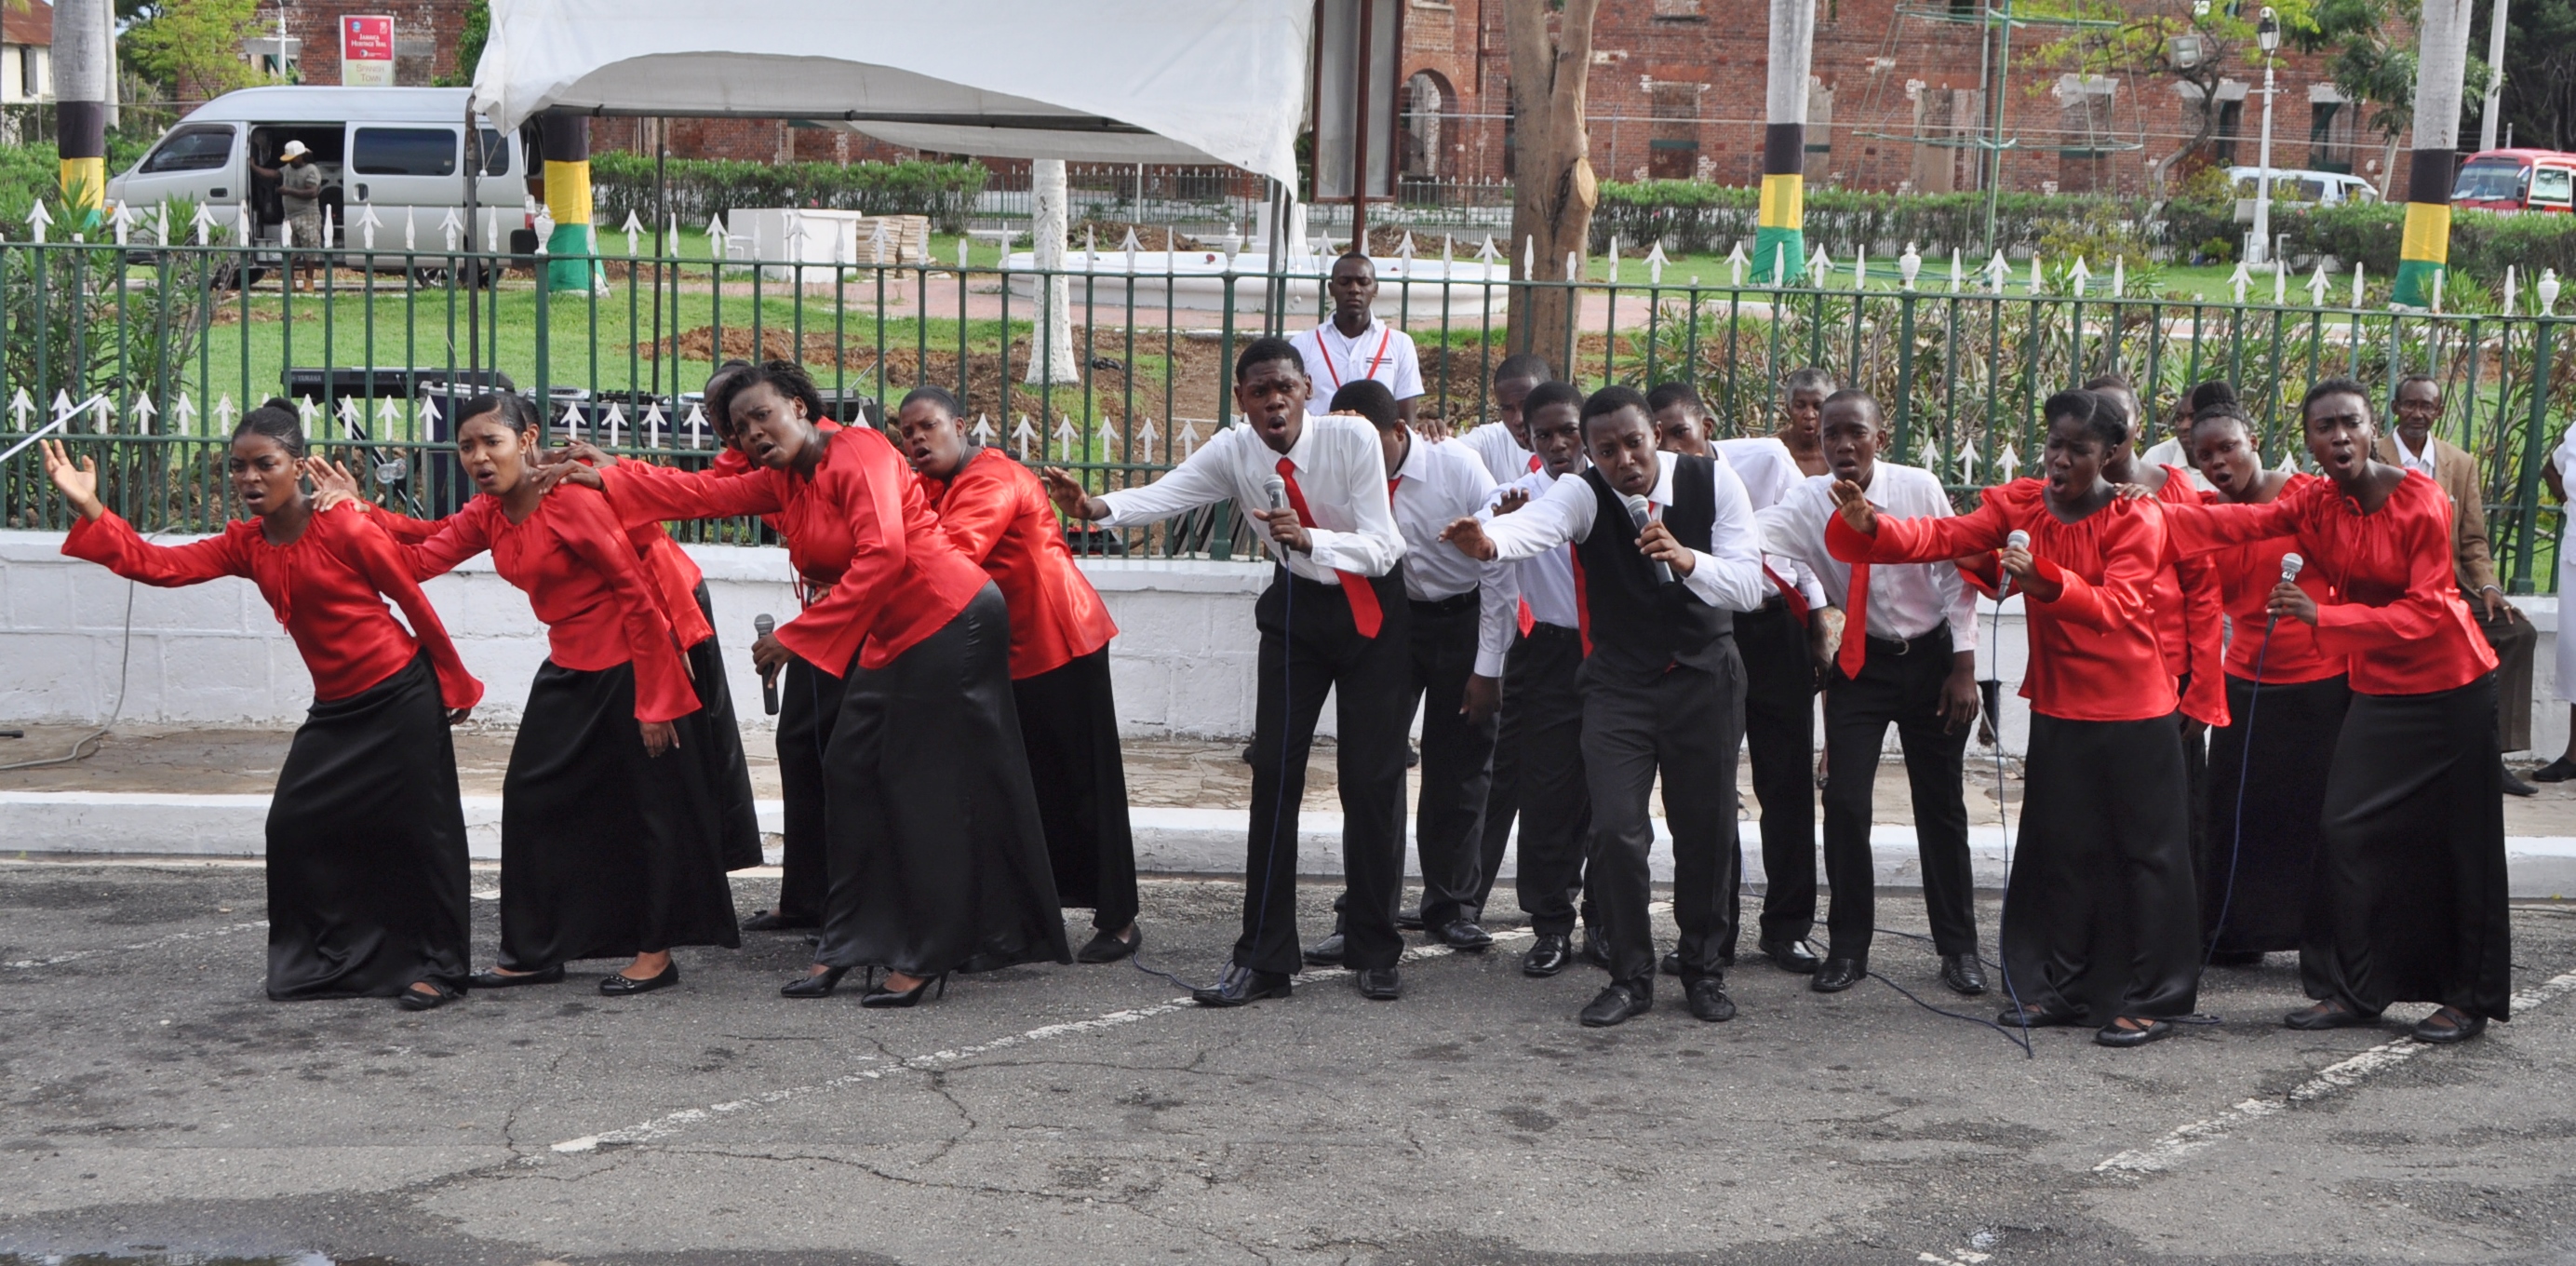 Diocesan Schools Featured At Cathedral Sunday 2014